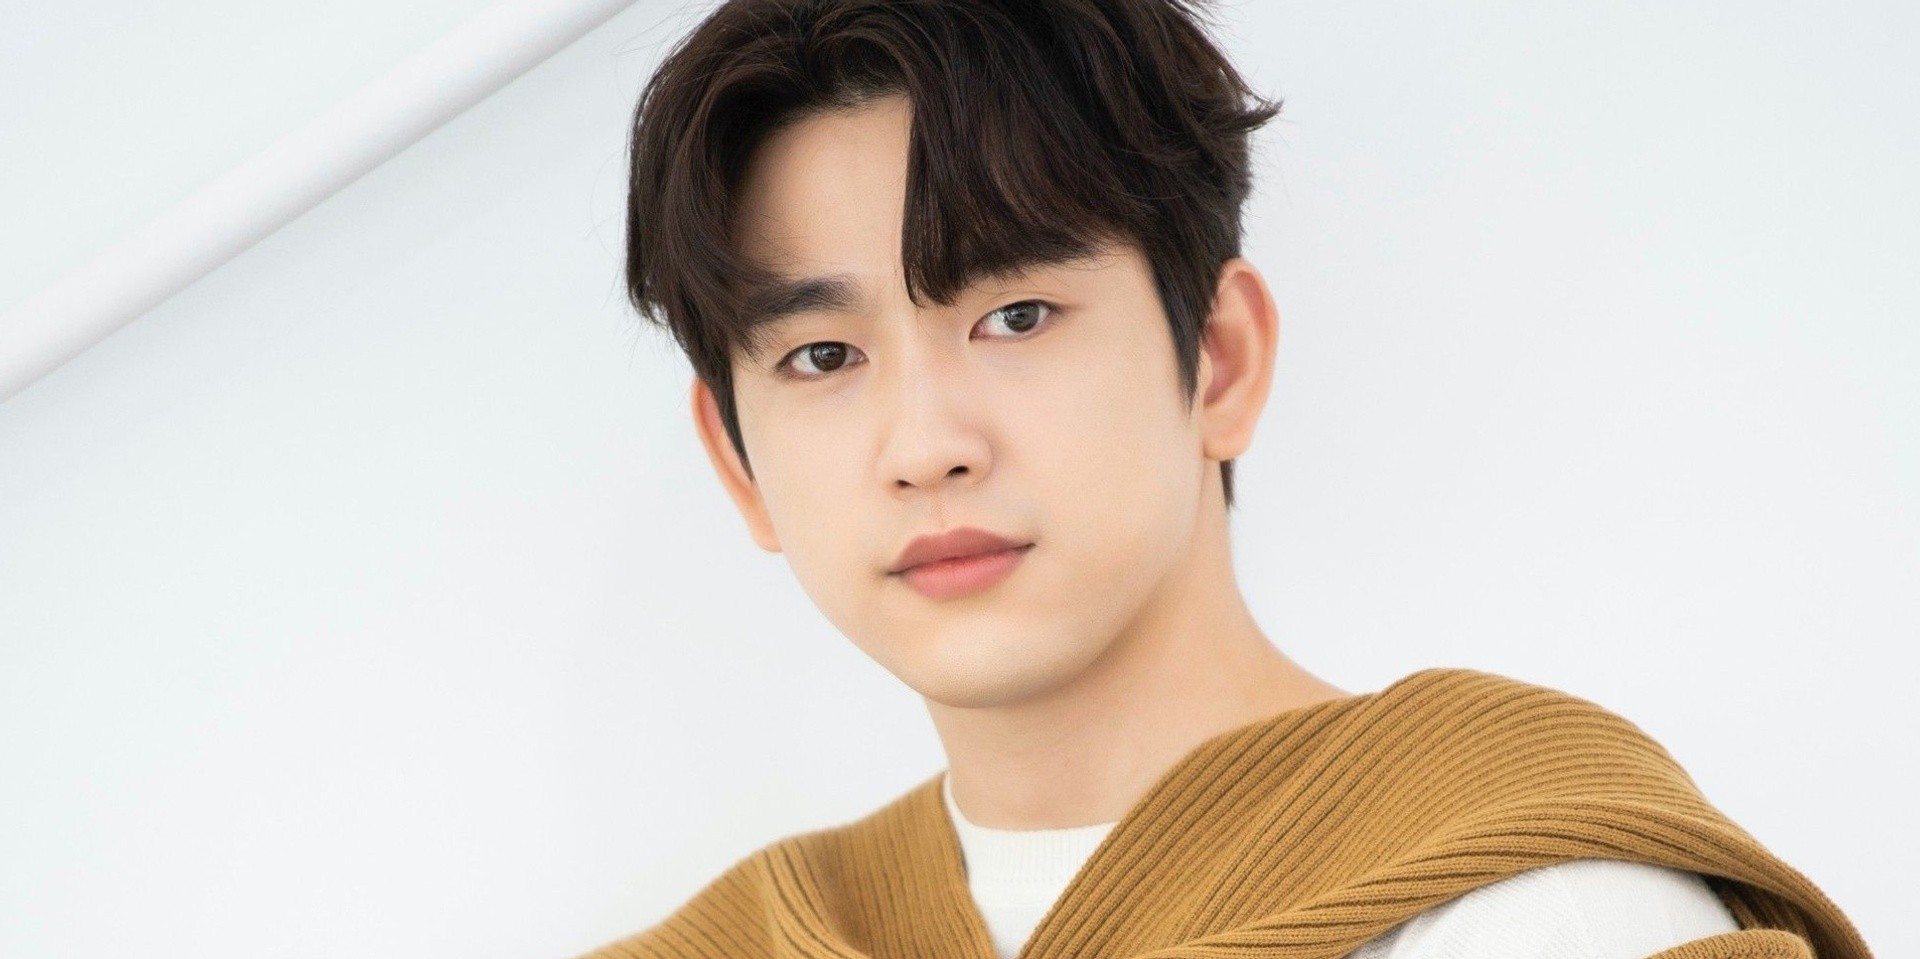 GOT7's Jinyoung drops surprise single and music video, 'DIVE' – watch